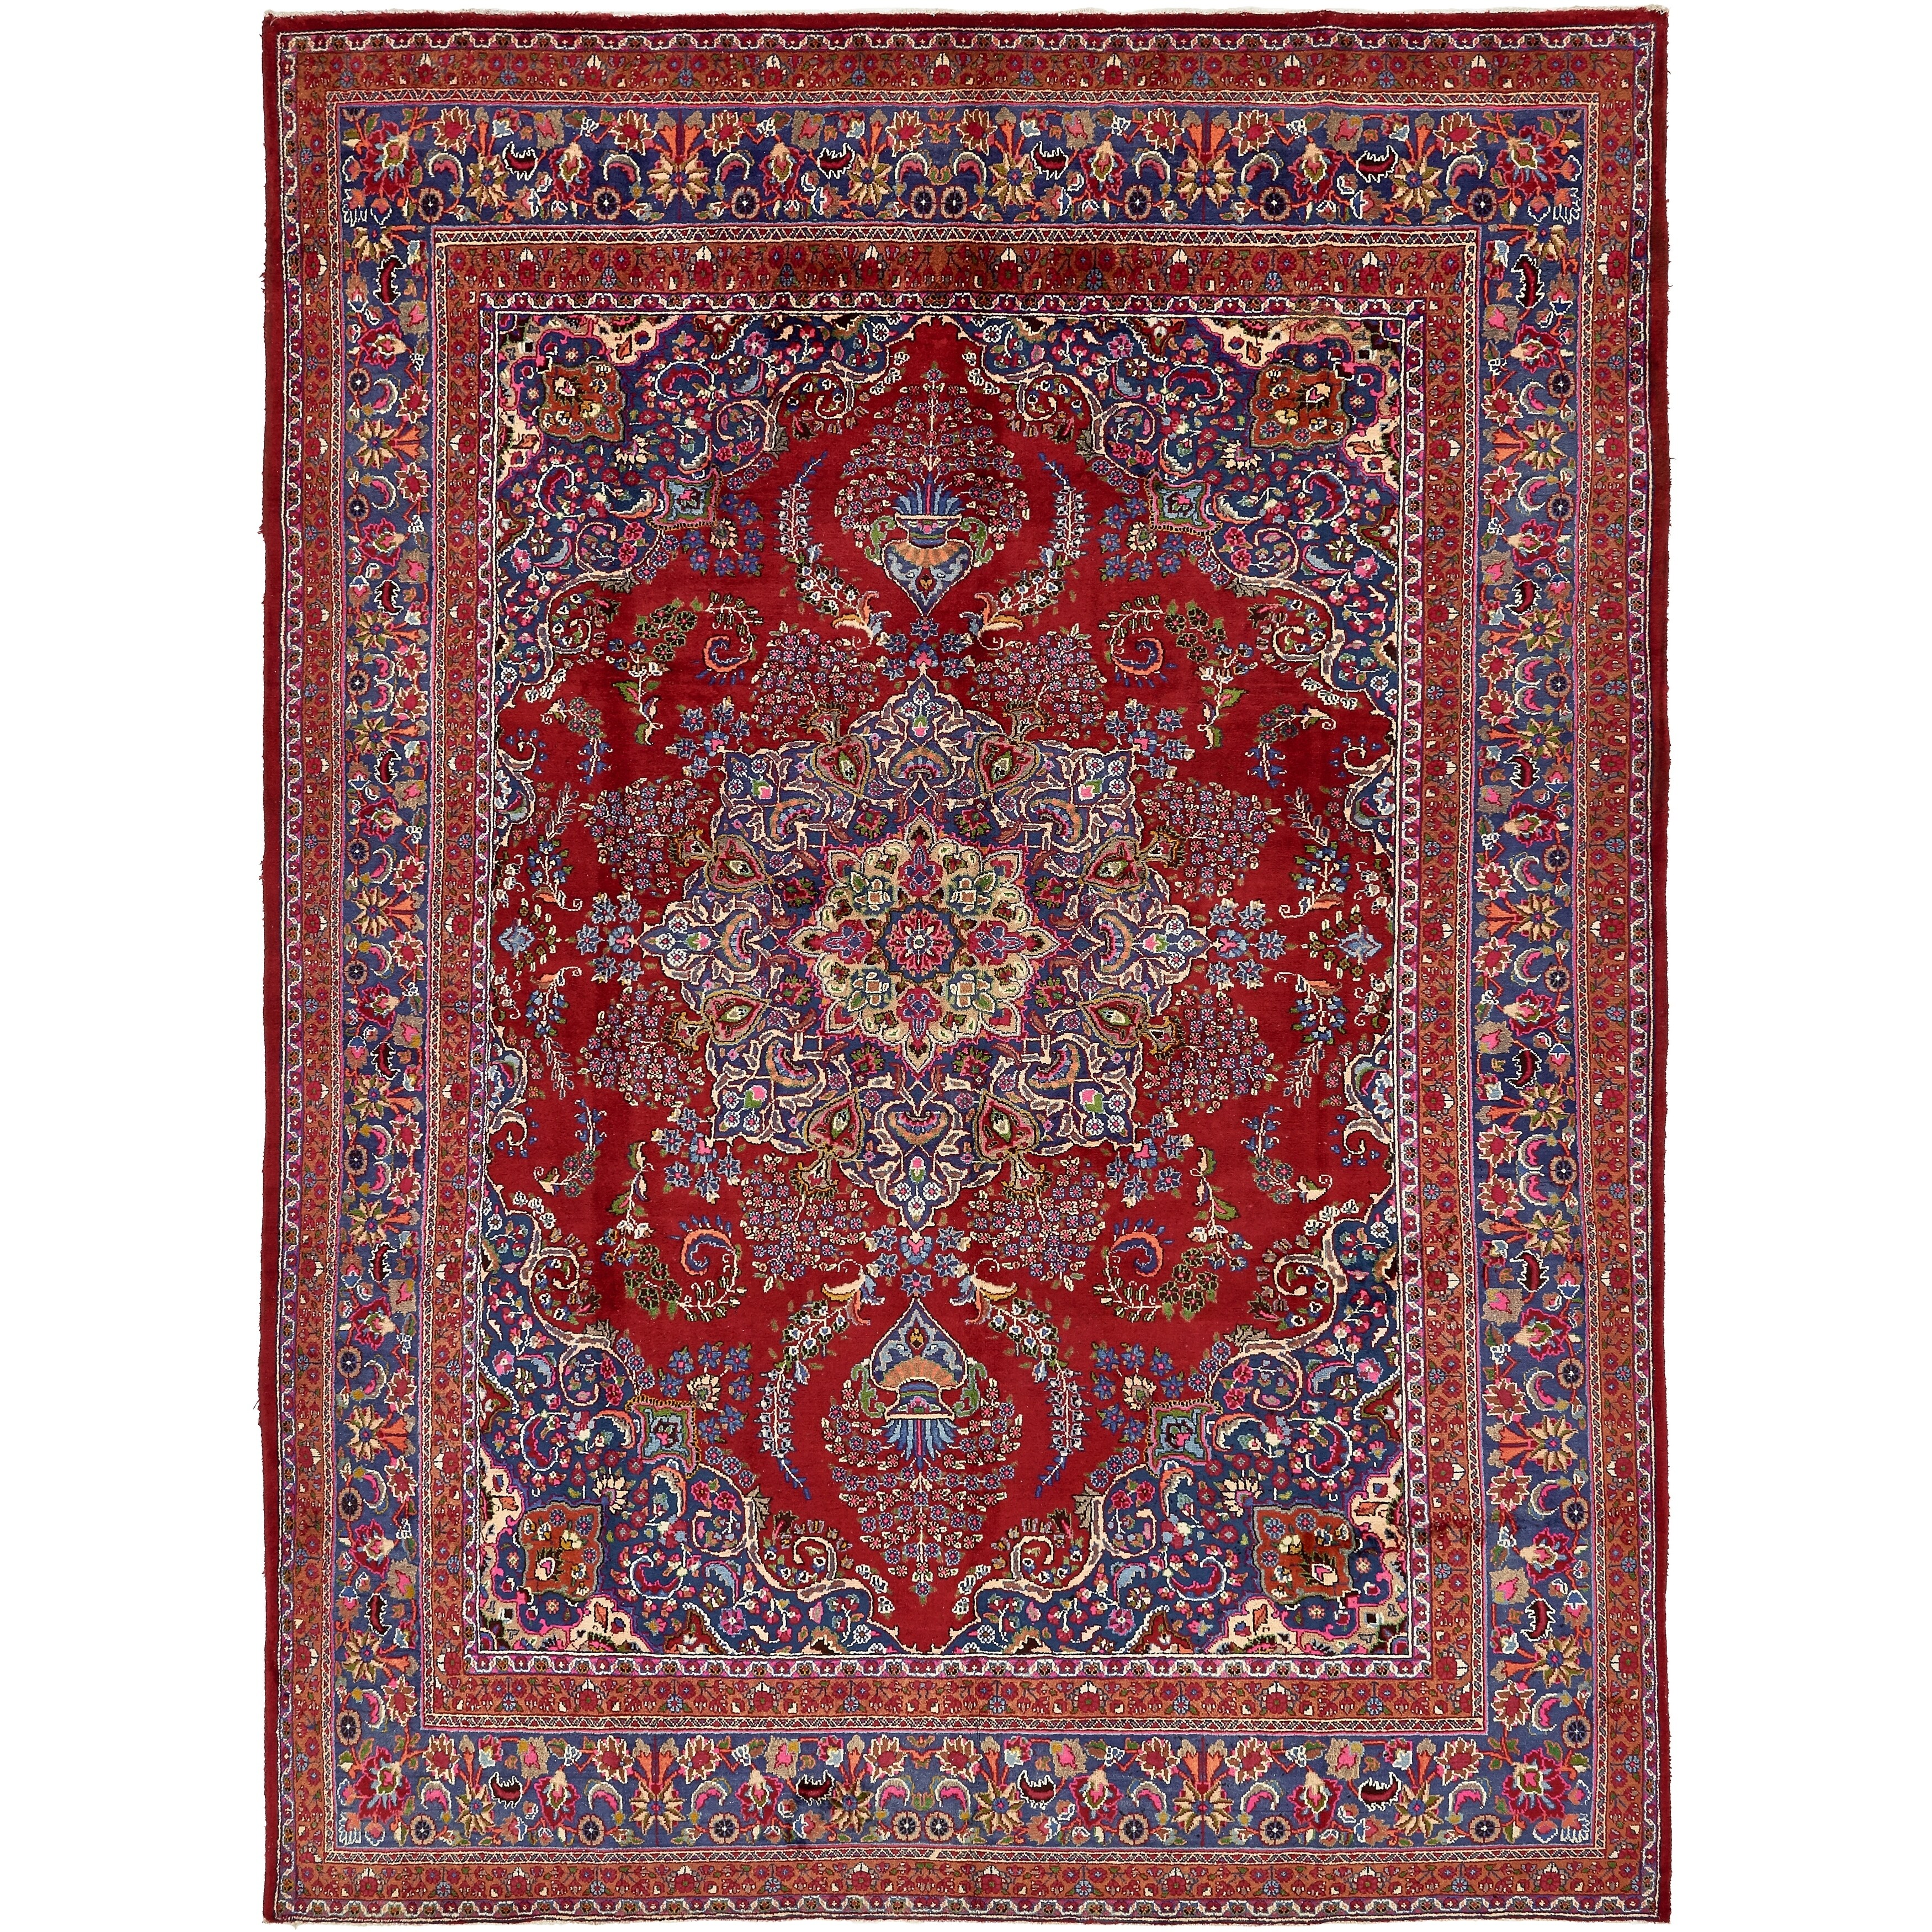 Bedroom Hand-Knotted Wool Rug eCarpet Gallery Large Area Rug for Living Room Lahor Finest Bordered Red Tapestry Kilim 10'0 x 14'0 338149 